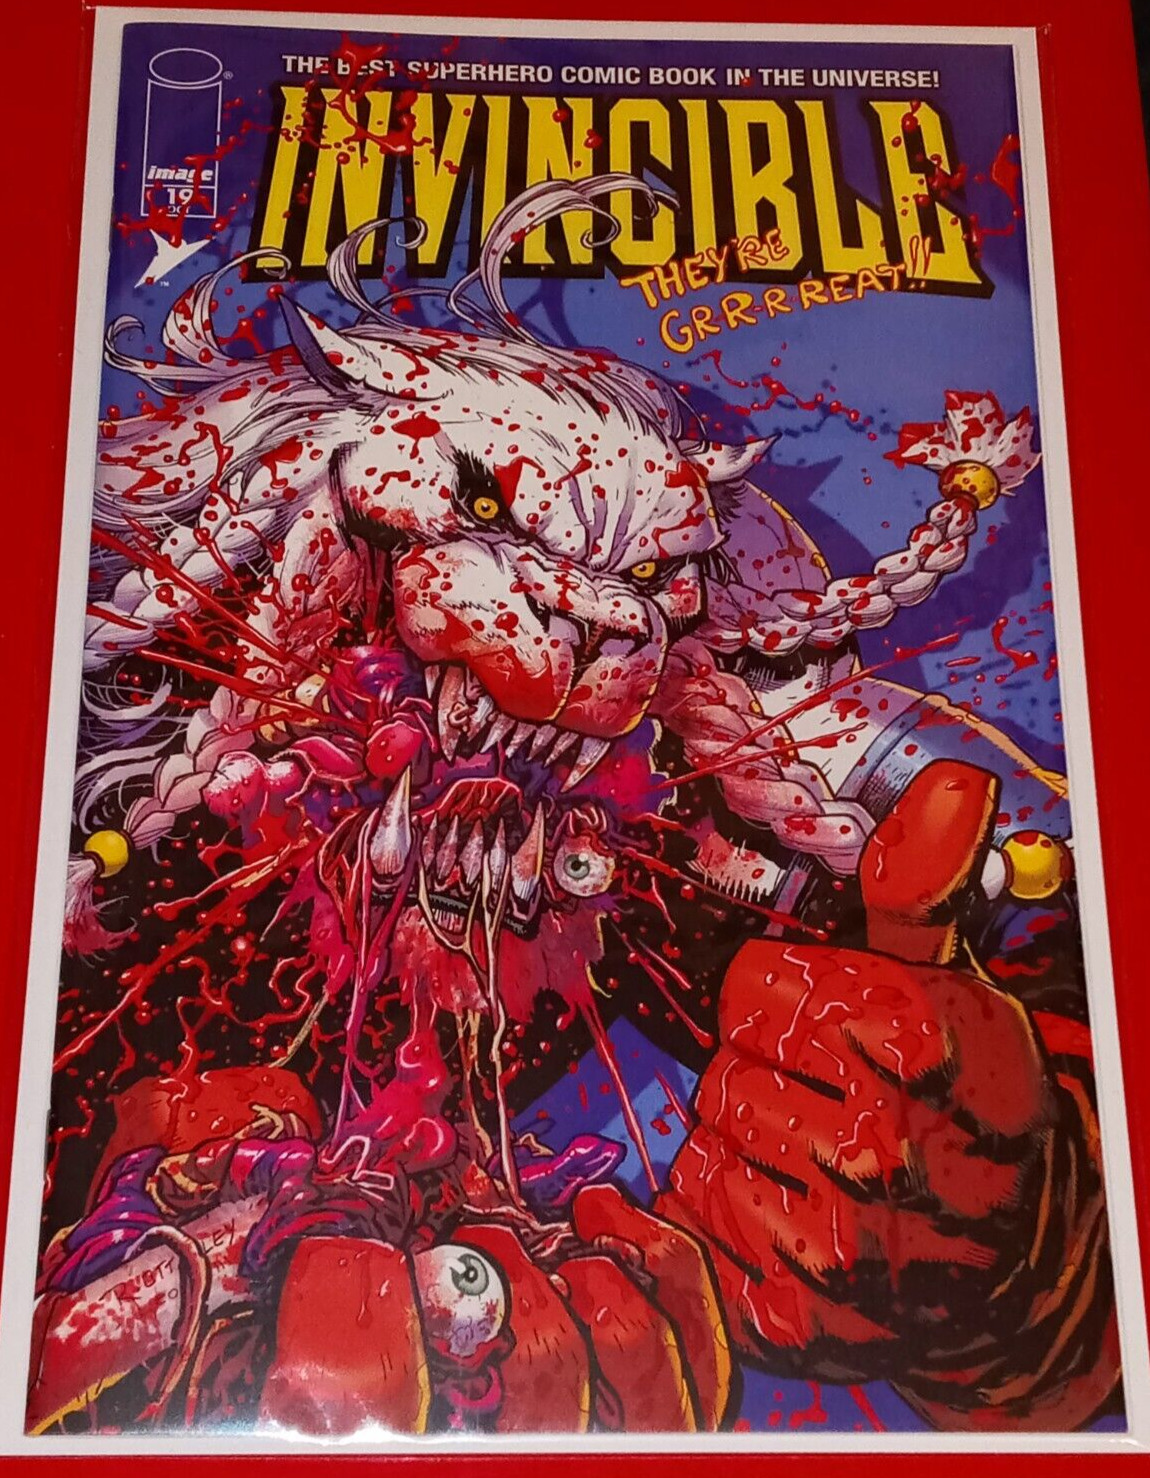 Invincible #19 -NYCC 2022- Battle-Beast TRADE DRESS Variant By Ryan Ottley